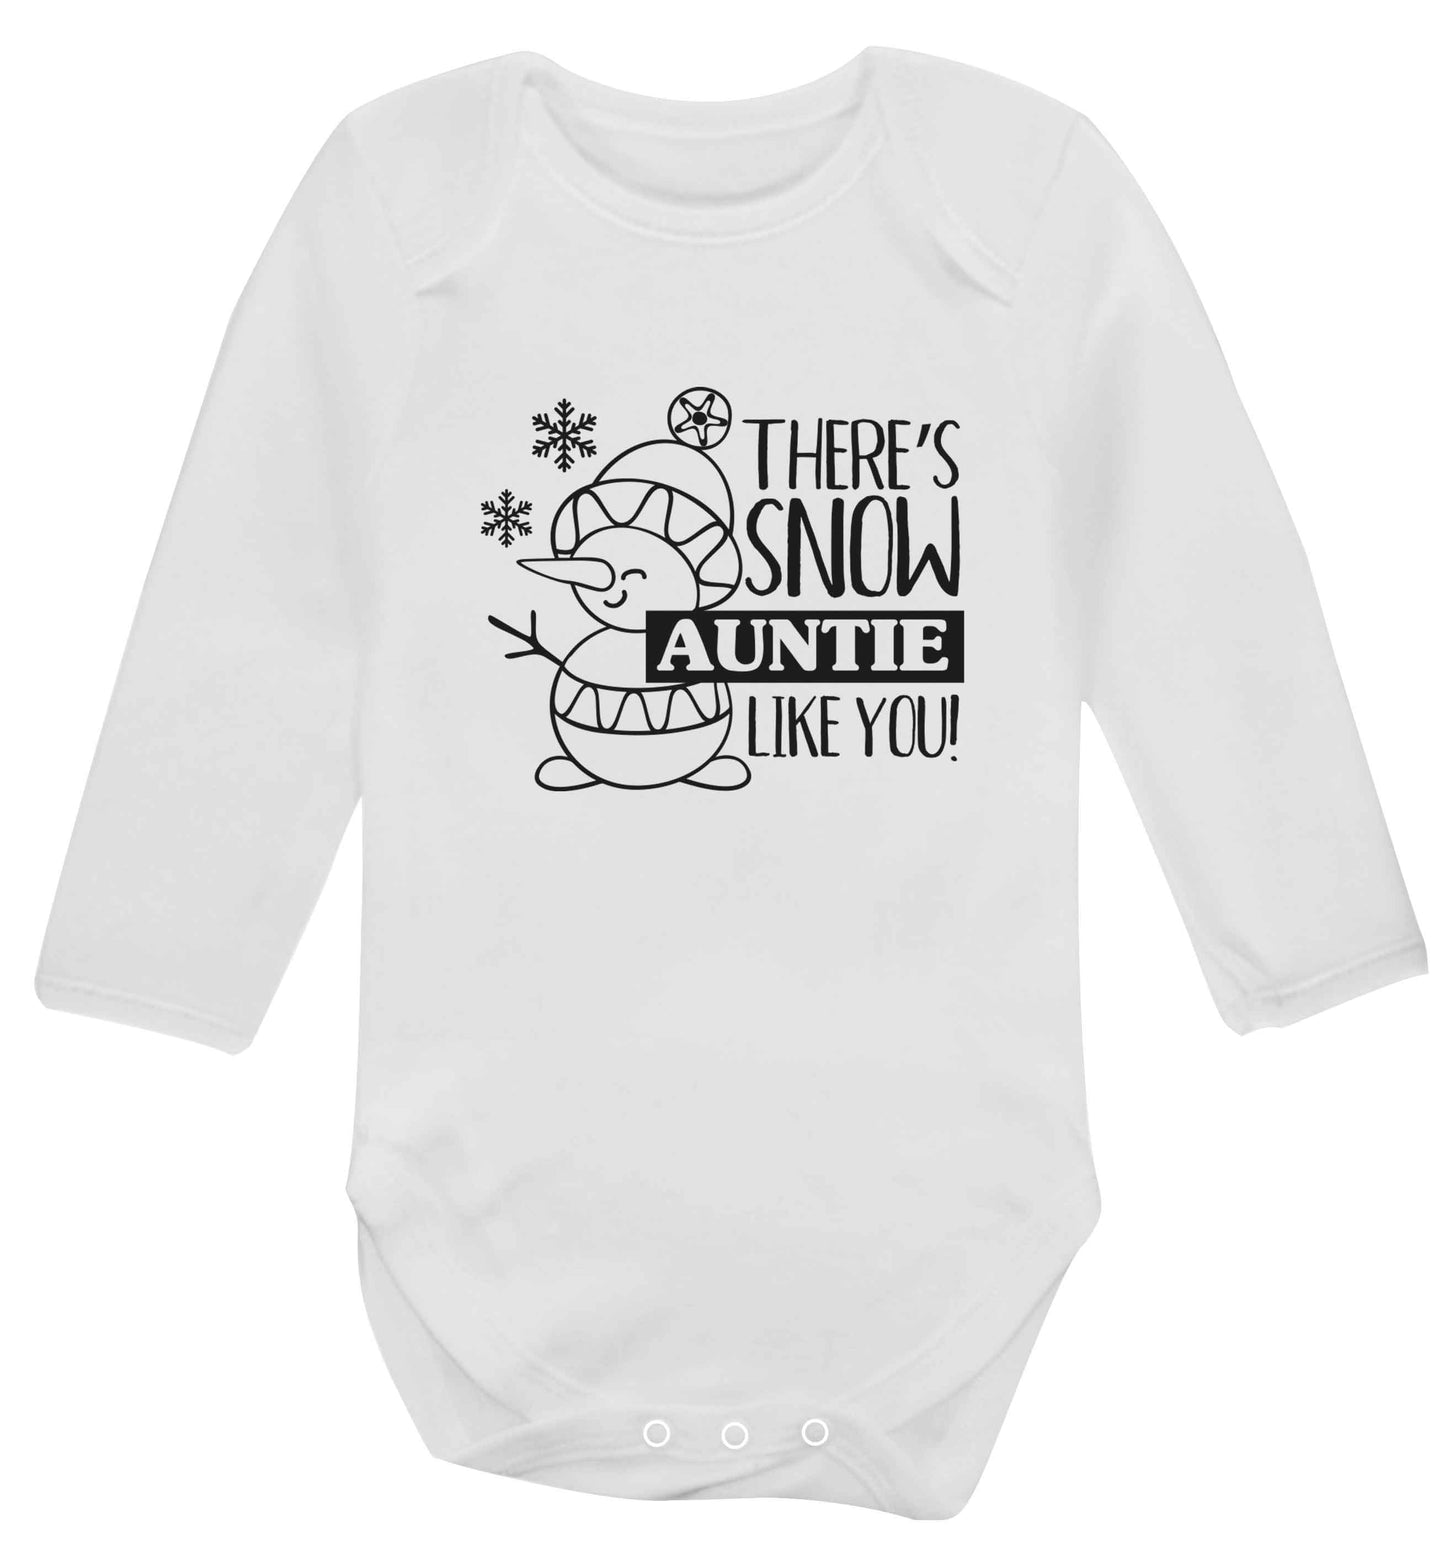 There's snow auntie like you baby vest long sleeved white 6-12 months